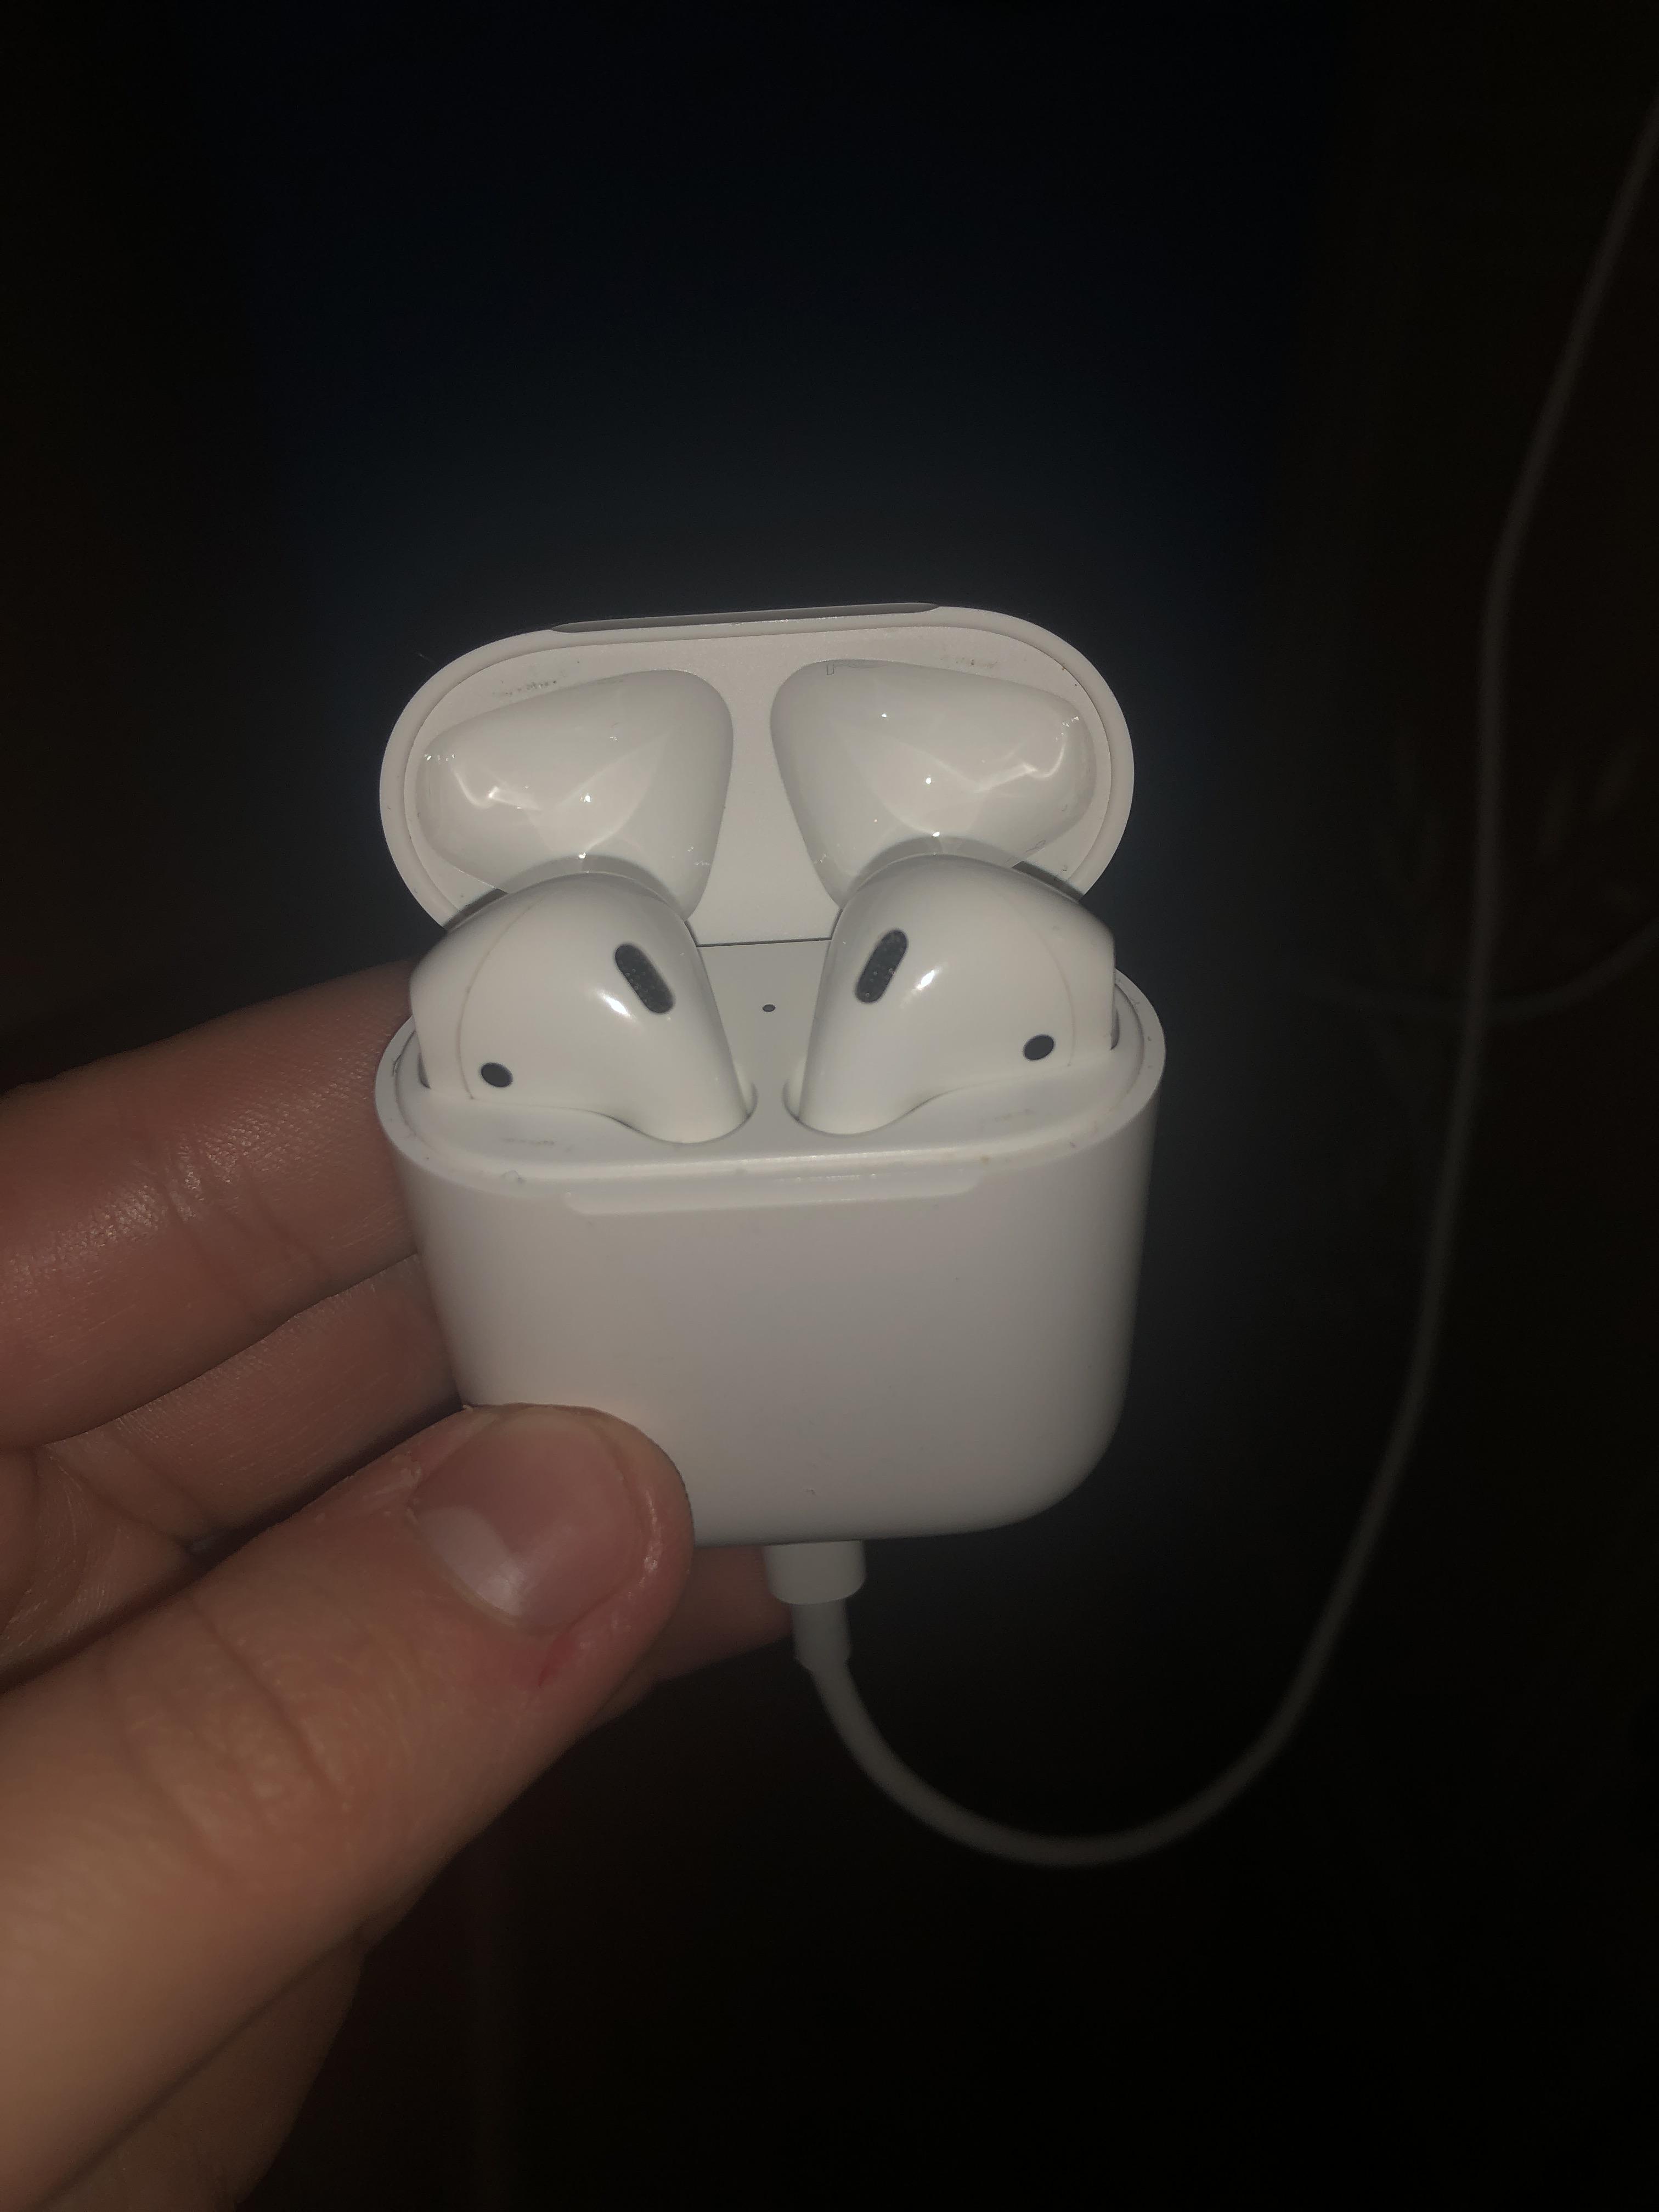 Airpods Pro Case Dropped Not Charging